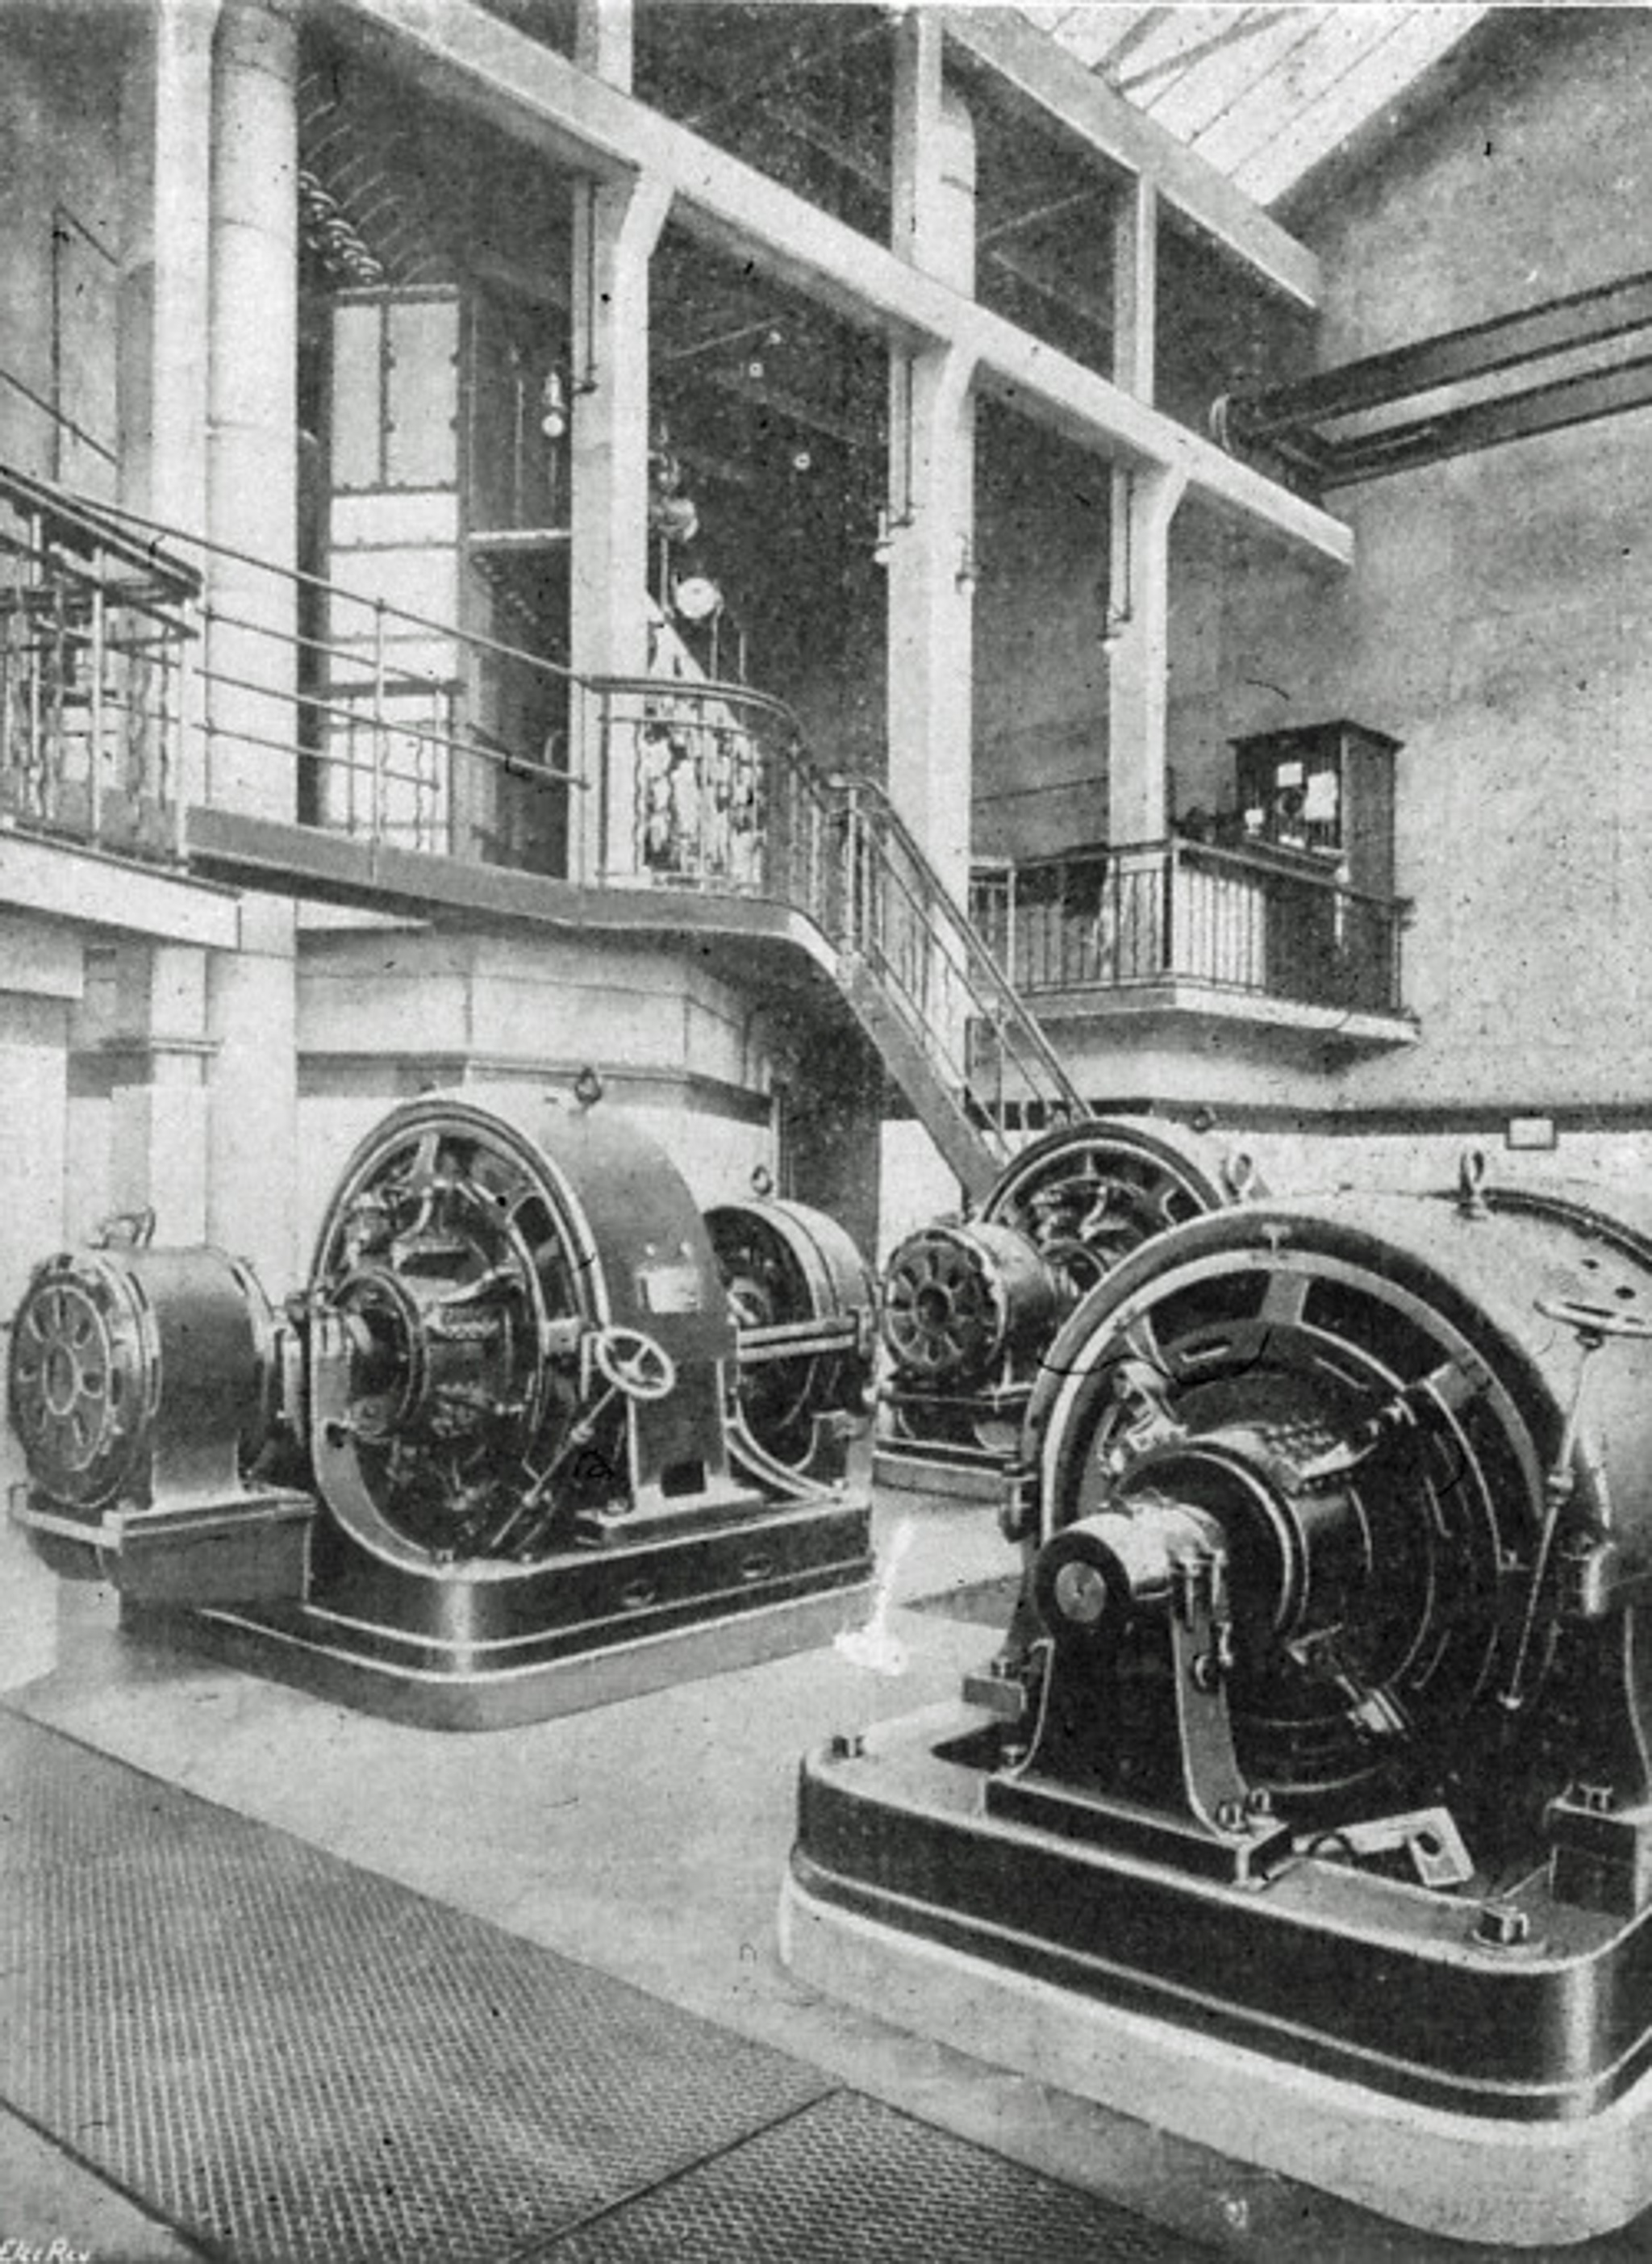 Historical Interior
Via this Tweet and taken from KYP Bristol, showing the interior with a couple of Westinghouse rotary converters and a Peebles-La Cour motor convert...